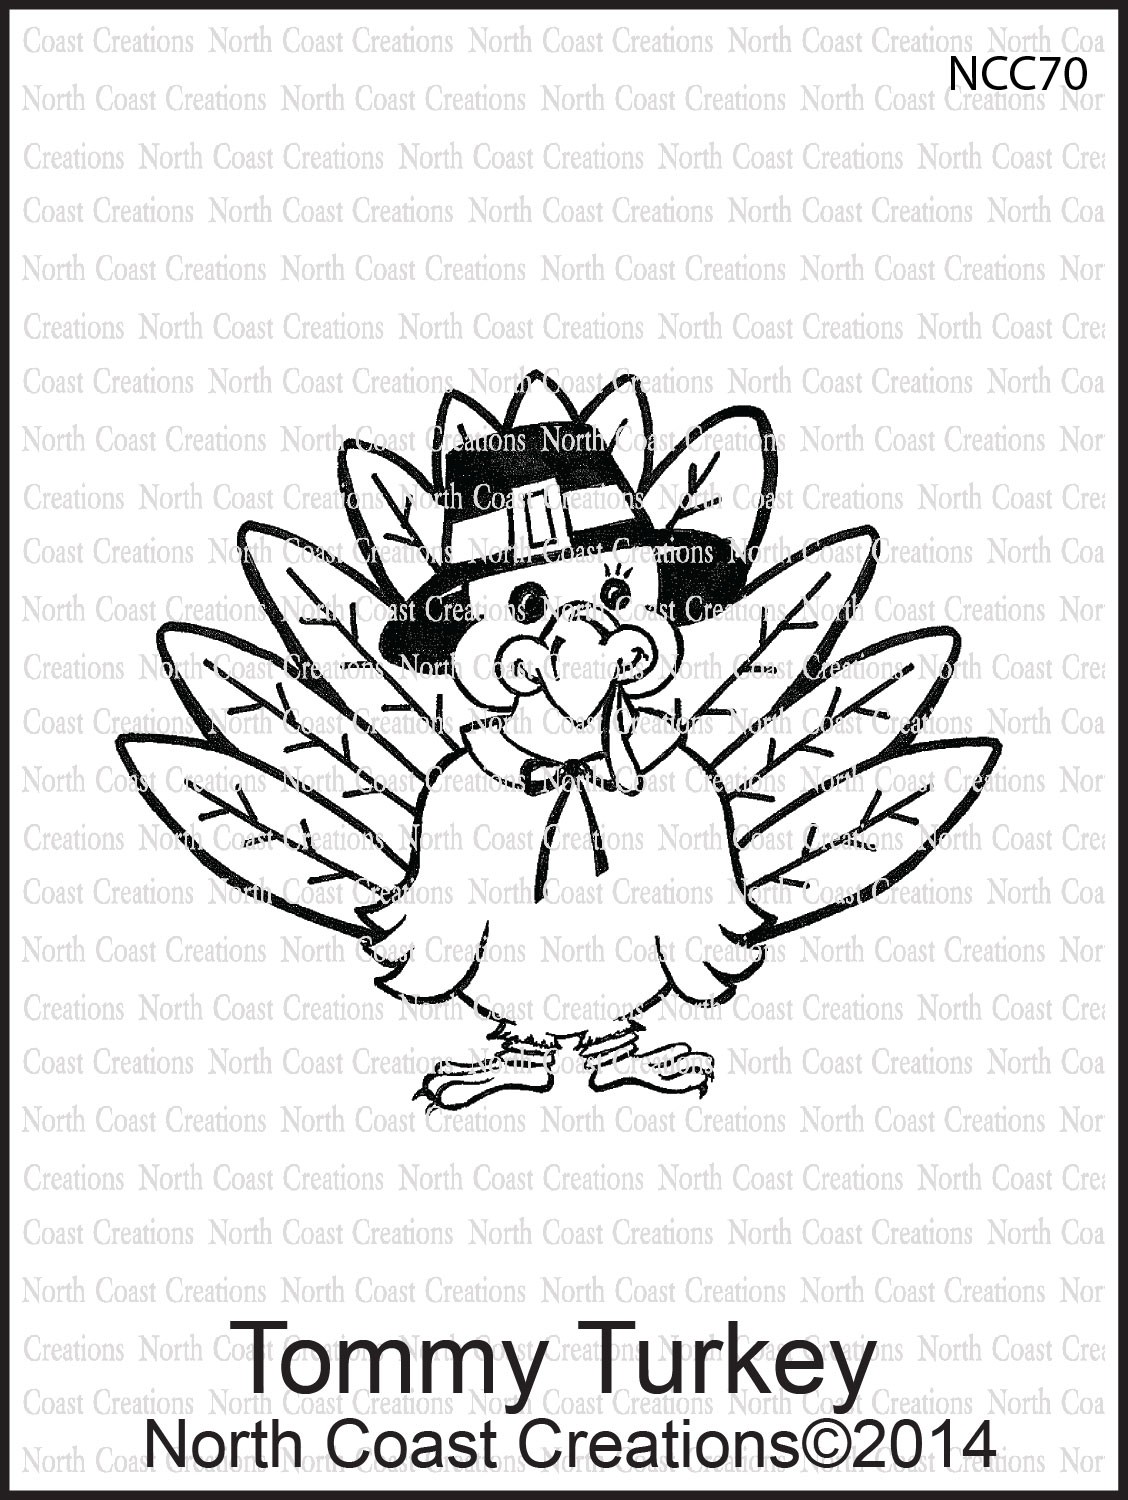 https://www.northcoastcreations.com/index.php/new-releases/2014-october/ncc70-tommy-turkey.html